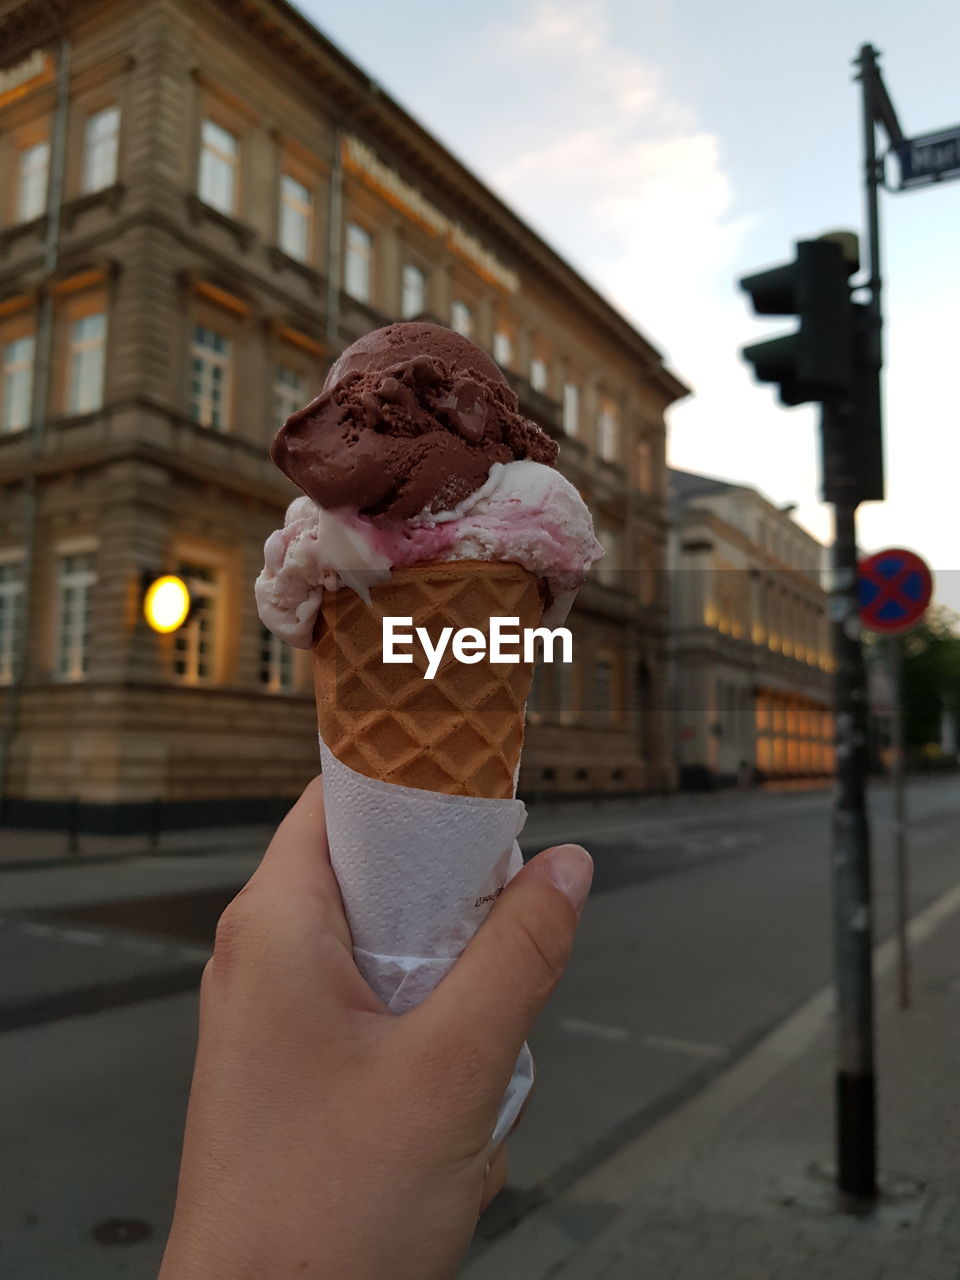 MIDSECTION OF PERSON HOLDING ICE CREAM CONE IN CITY DURING WINTER